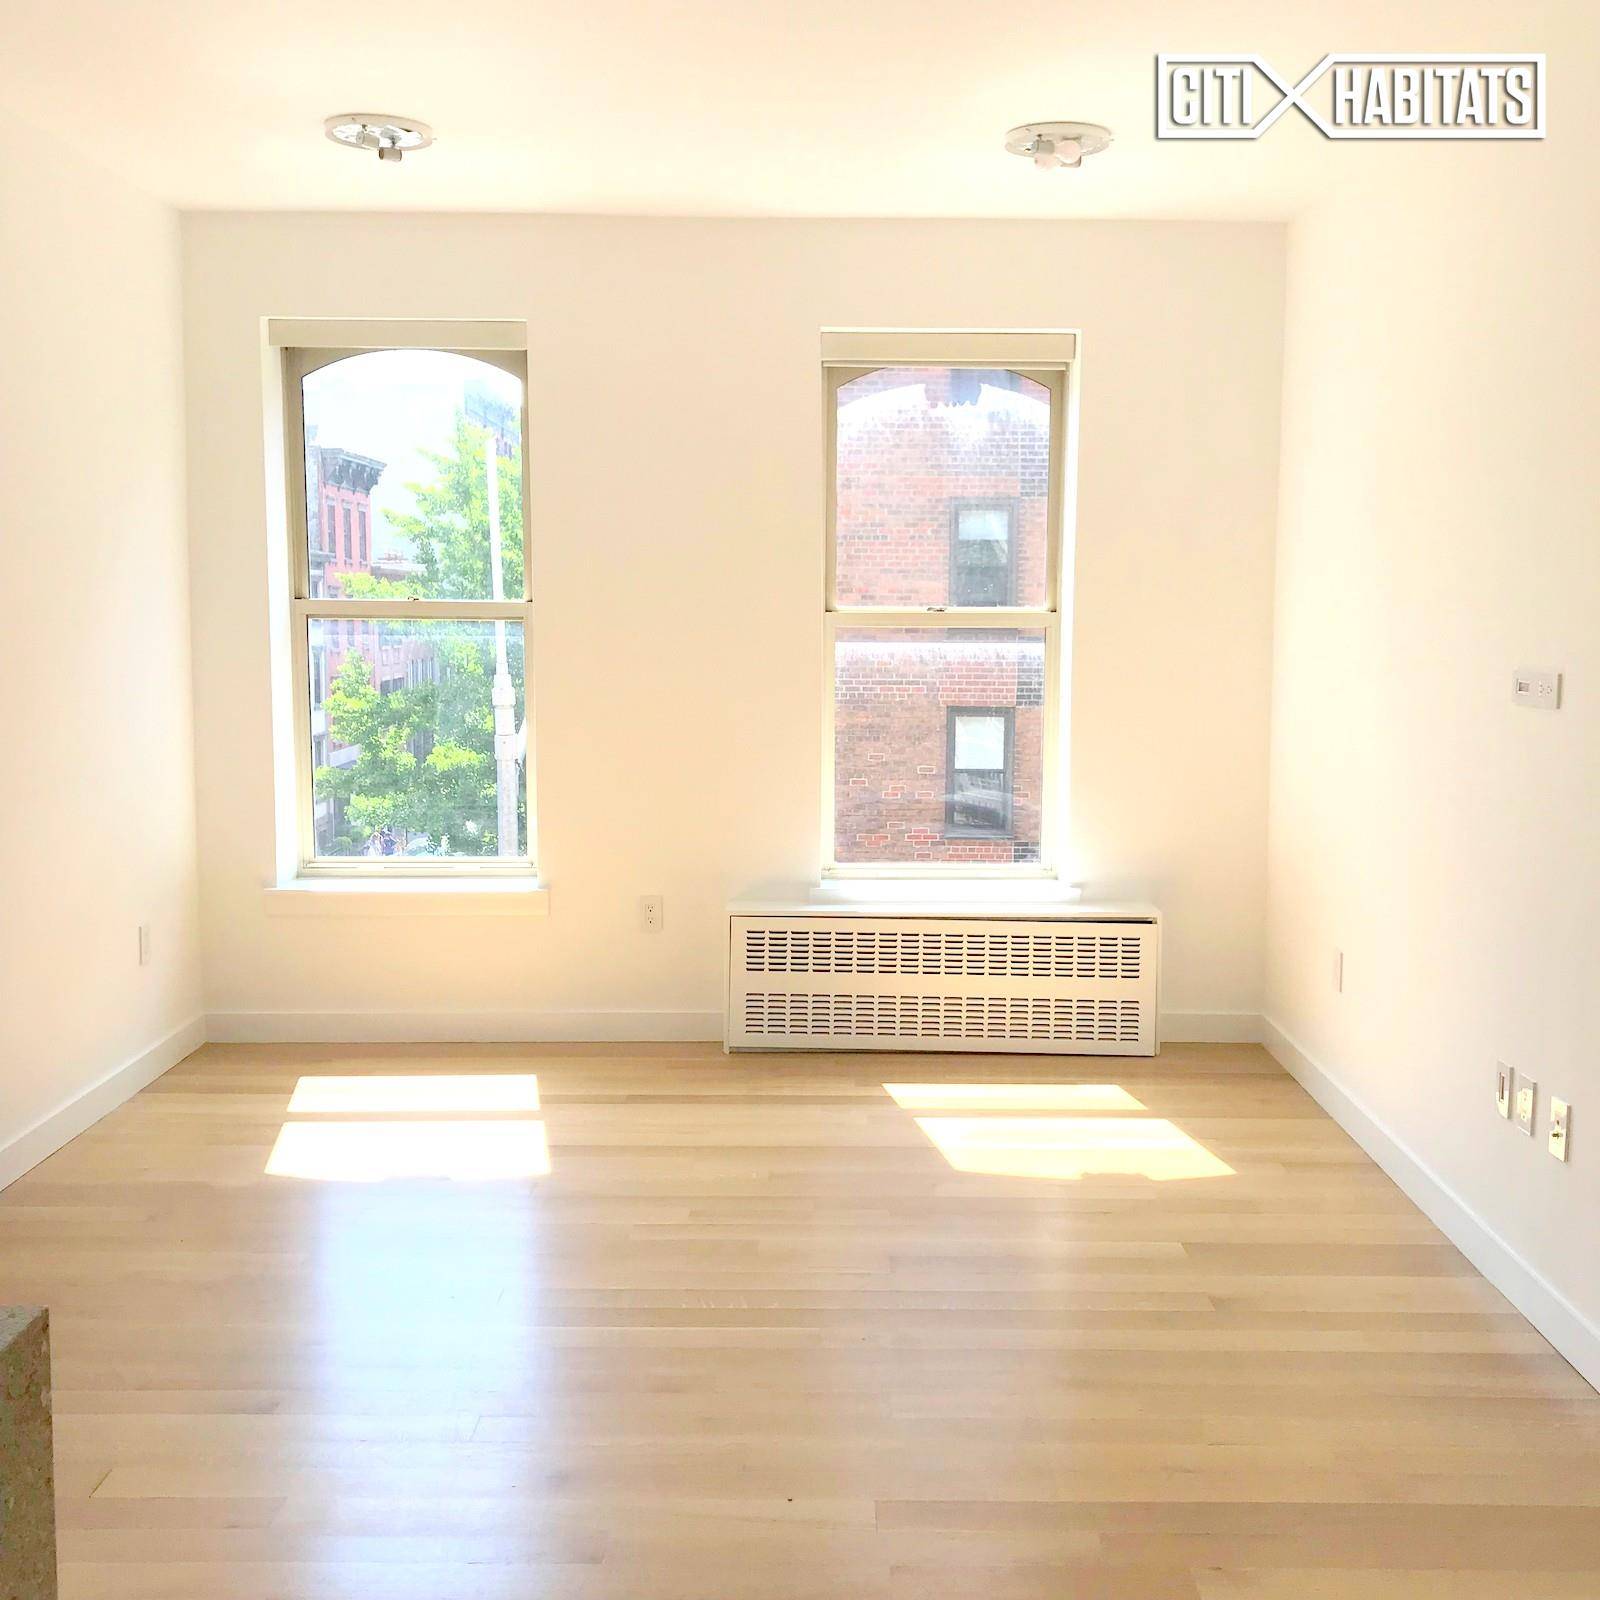 Brand New Renovations ! Charming and Spacious one bedroom apartment located on what is undoubtedly on of the most desirable blocks in all of the West Village.